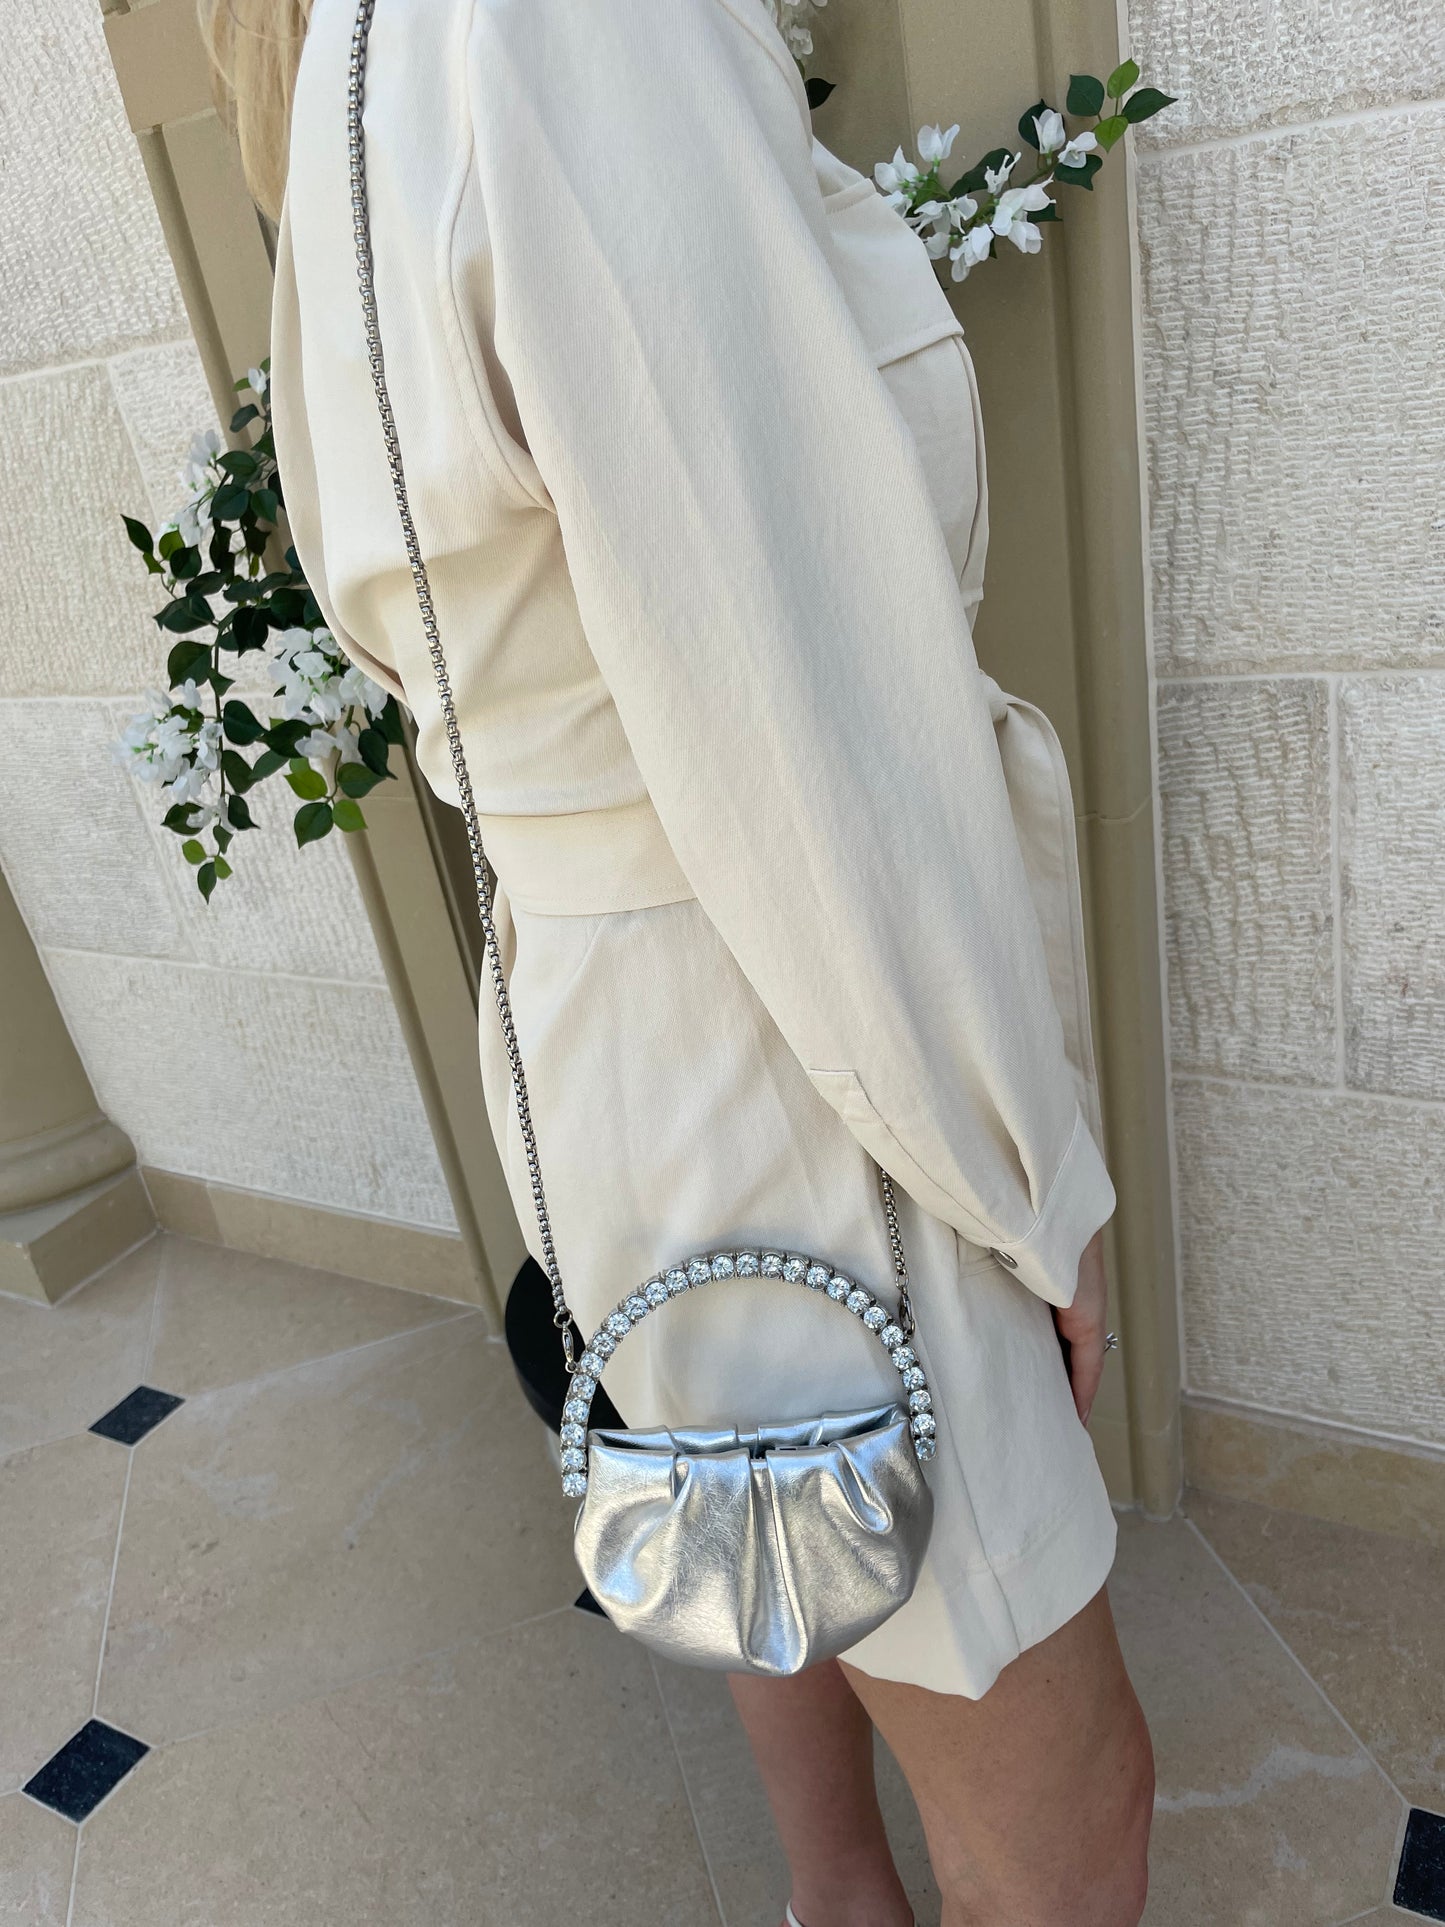 Lady wearing the Silver Mini Clutch bag with silver chain-shoulder strap on her side